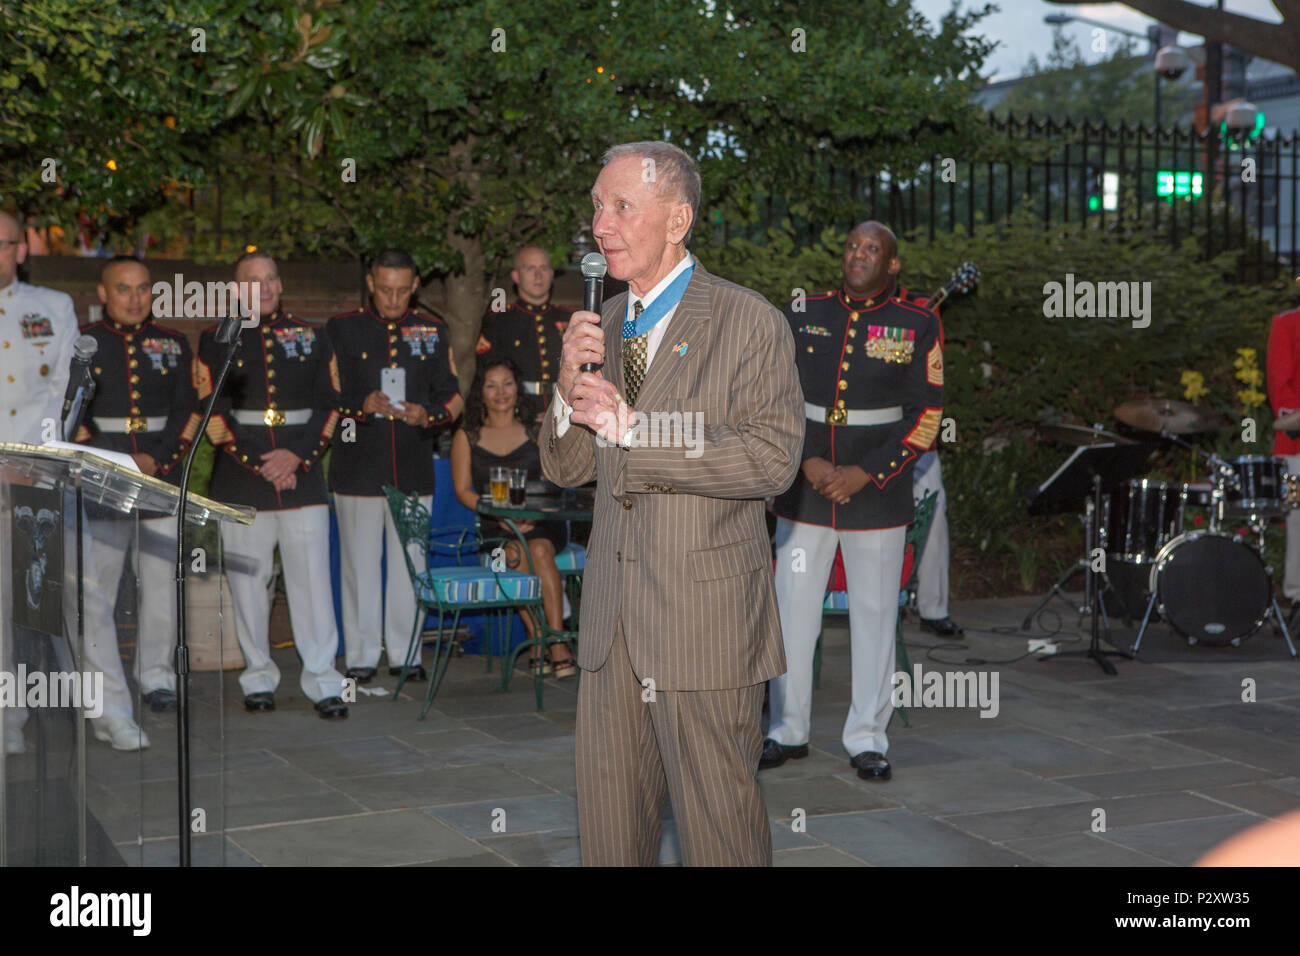 Retired U.S. Marine Corps Maj. Gen James Livingston, Medal of Honor recipient, speaks to the audience during the evening parade reception in the Marine Family Garden, Marine Barracks Washington, Washington, D.C., Aug. 5, 2016. Evening parades are held as a means of honoring senior officials, distinguished citizens and supporters of the Marine Corps. (U.S. Marine Corps photo by Cpl. Christian Varney) Stock Photo